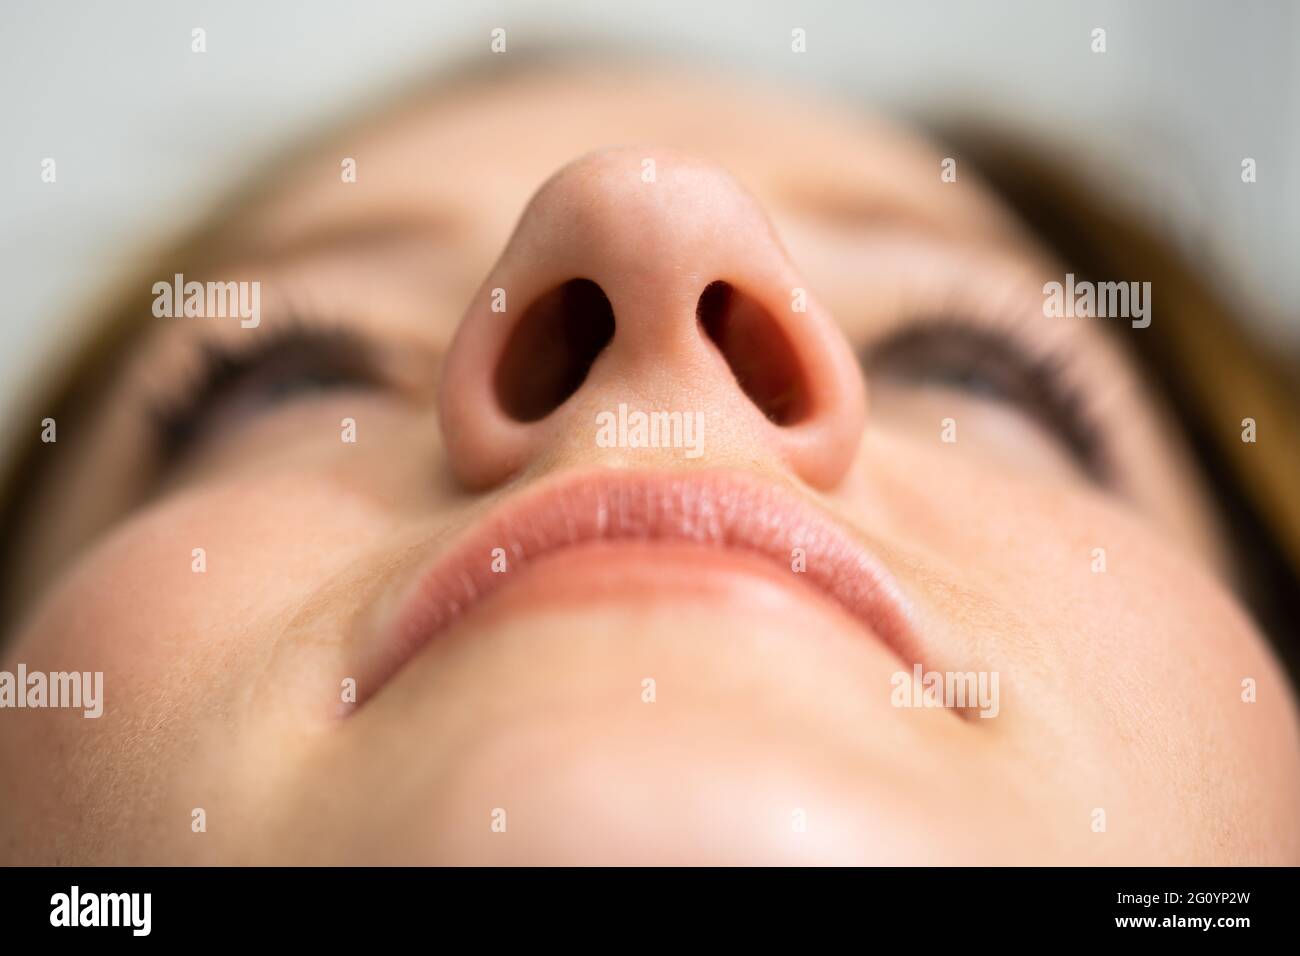 Young Woman After Aesthetic Facelift. Rhinoplasty Nose Surgery Stock Photo